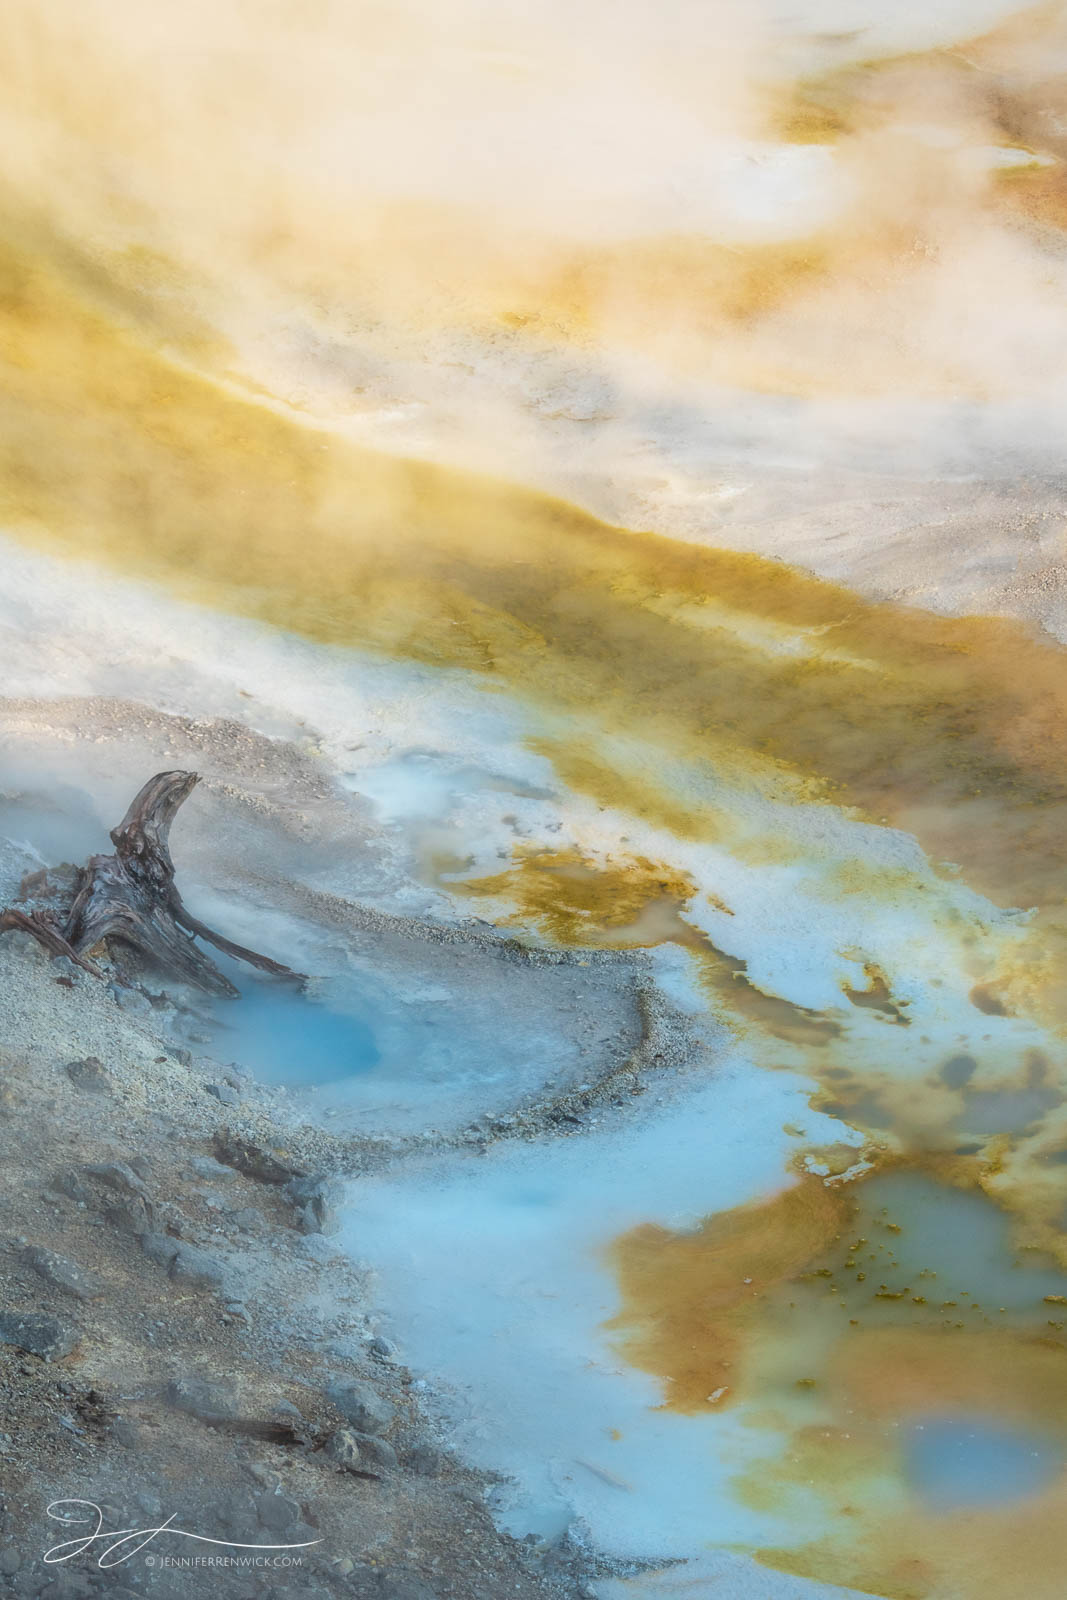 Colorful bacterial mats and steam swirl near a dead tree stump adjacent to Porcelain Springs creating a mysterious landscape.